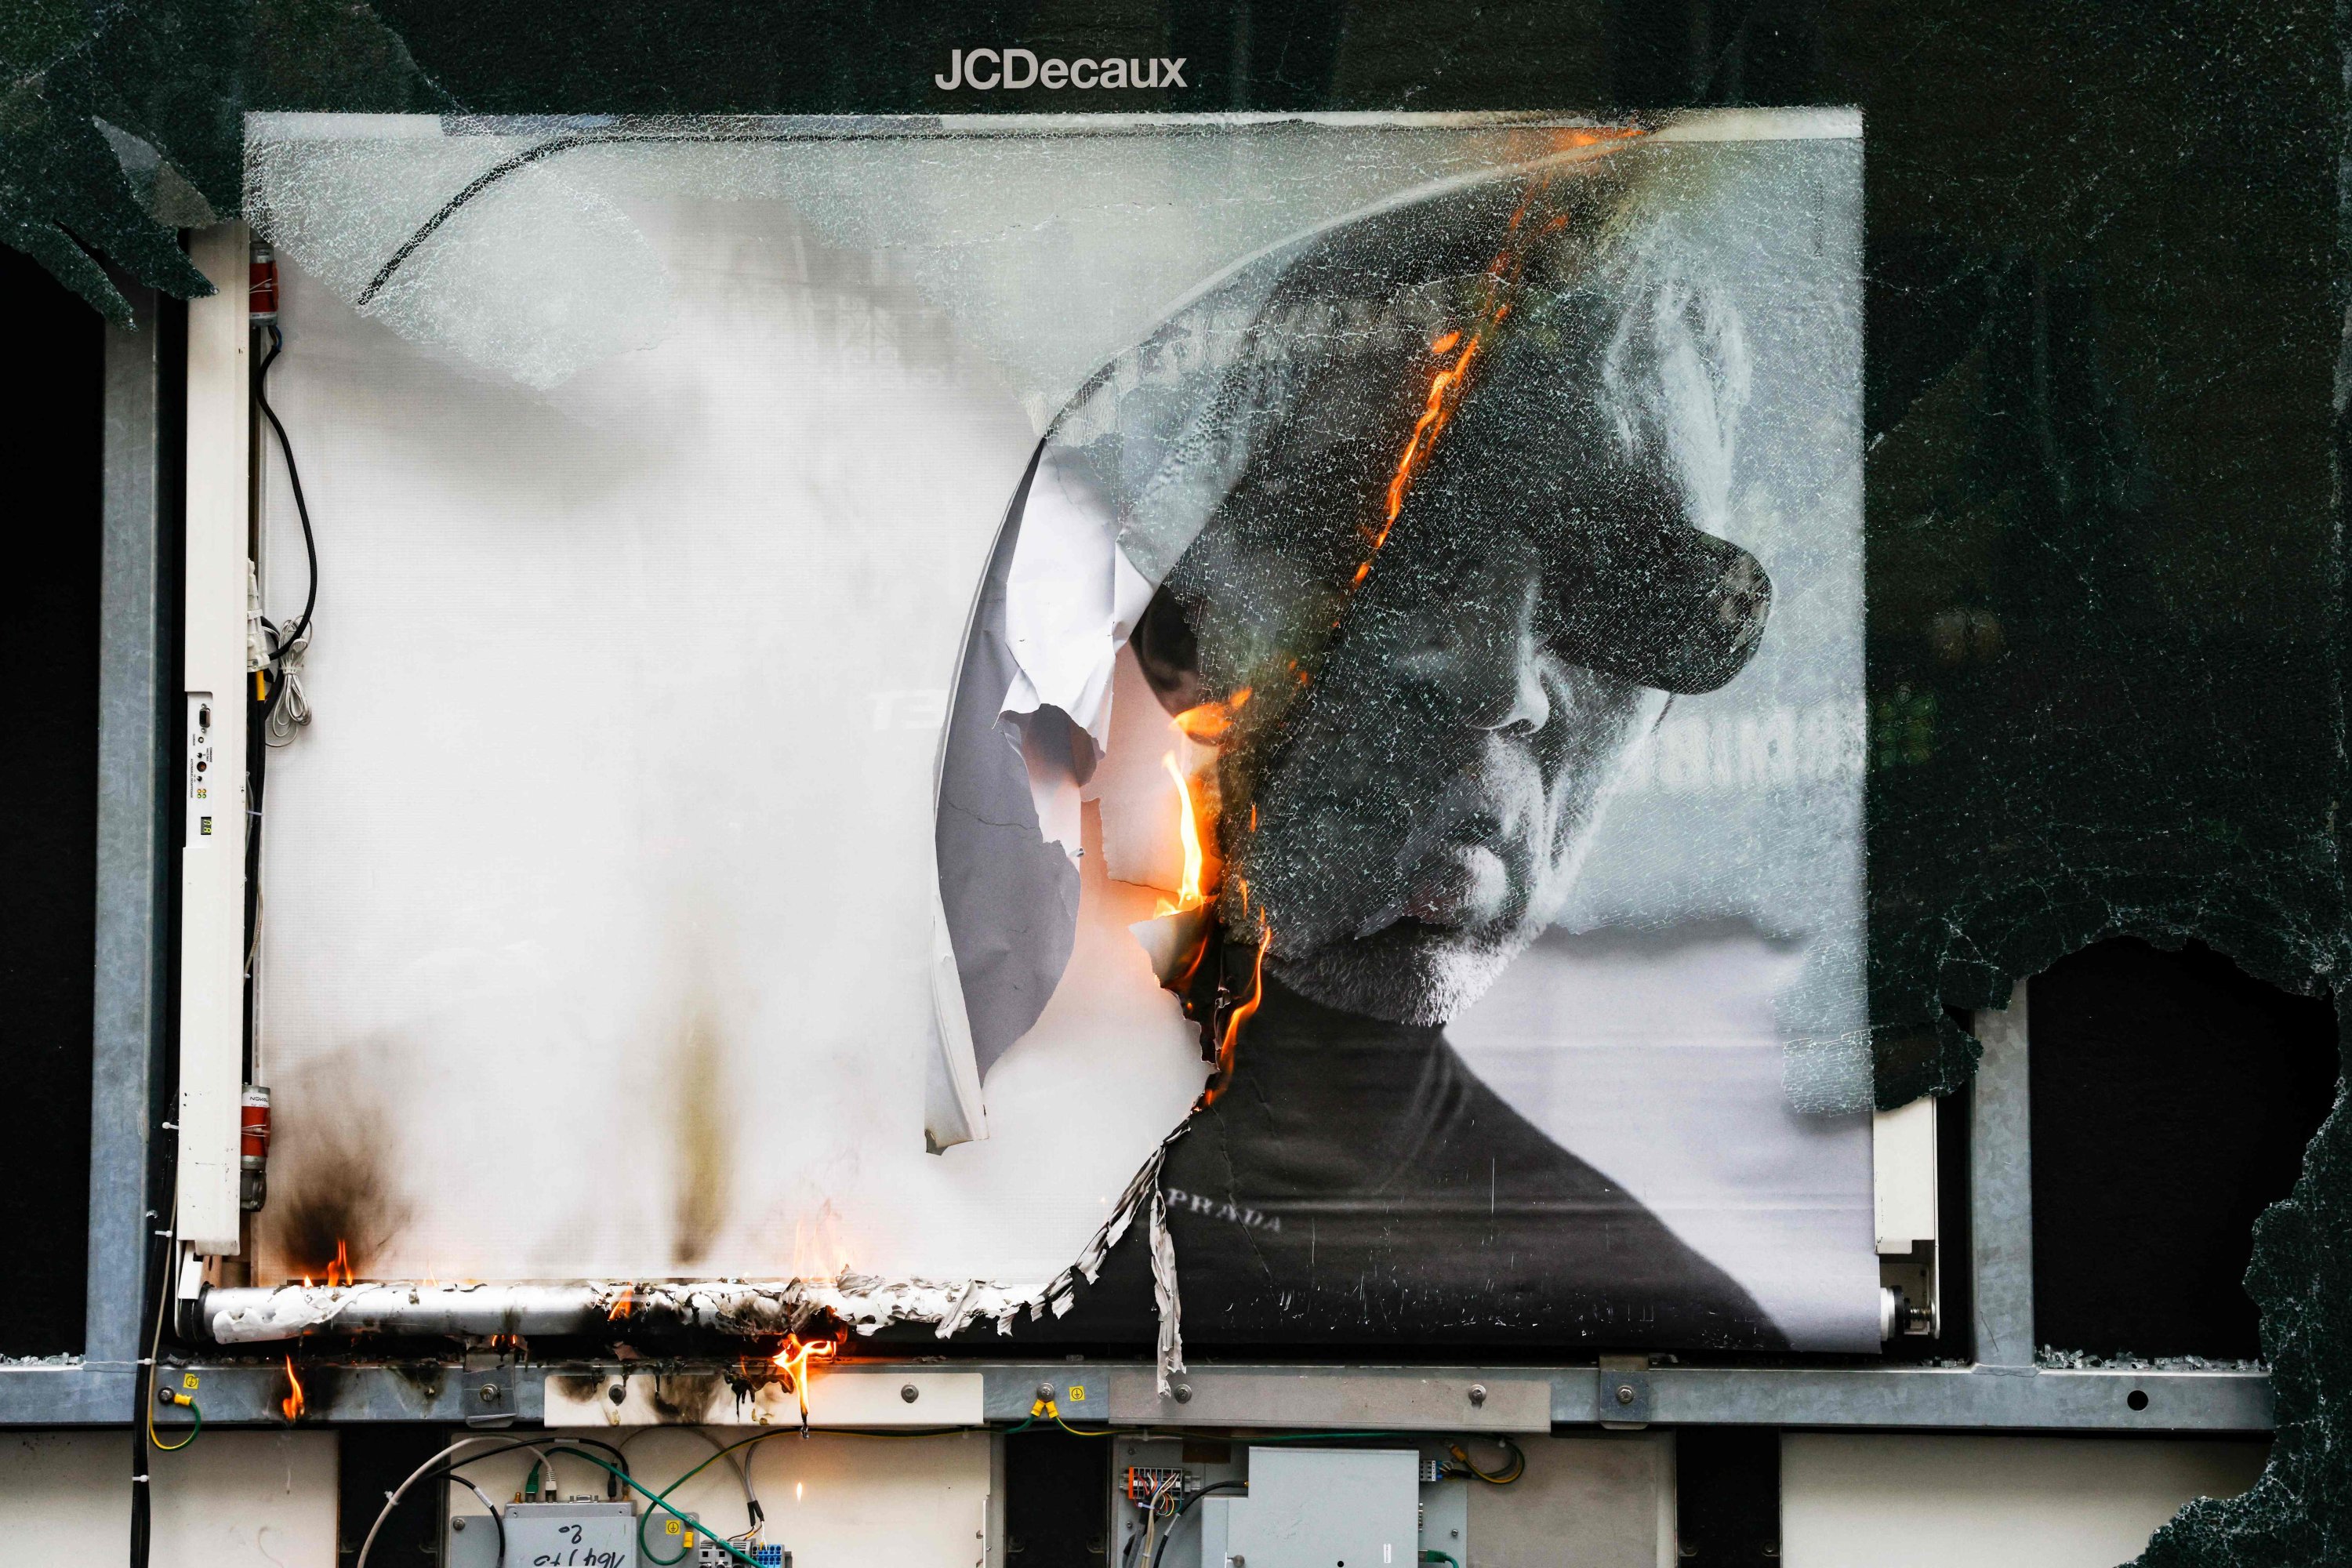 Flames burn an advertisement in a billboard during a demonstration on May Day in Paris, France, May 1, 2023. (AFP Photo)